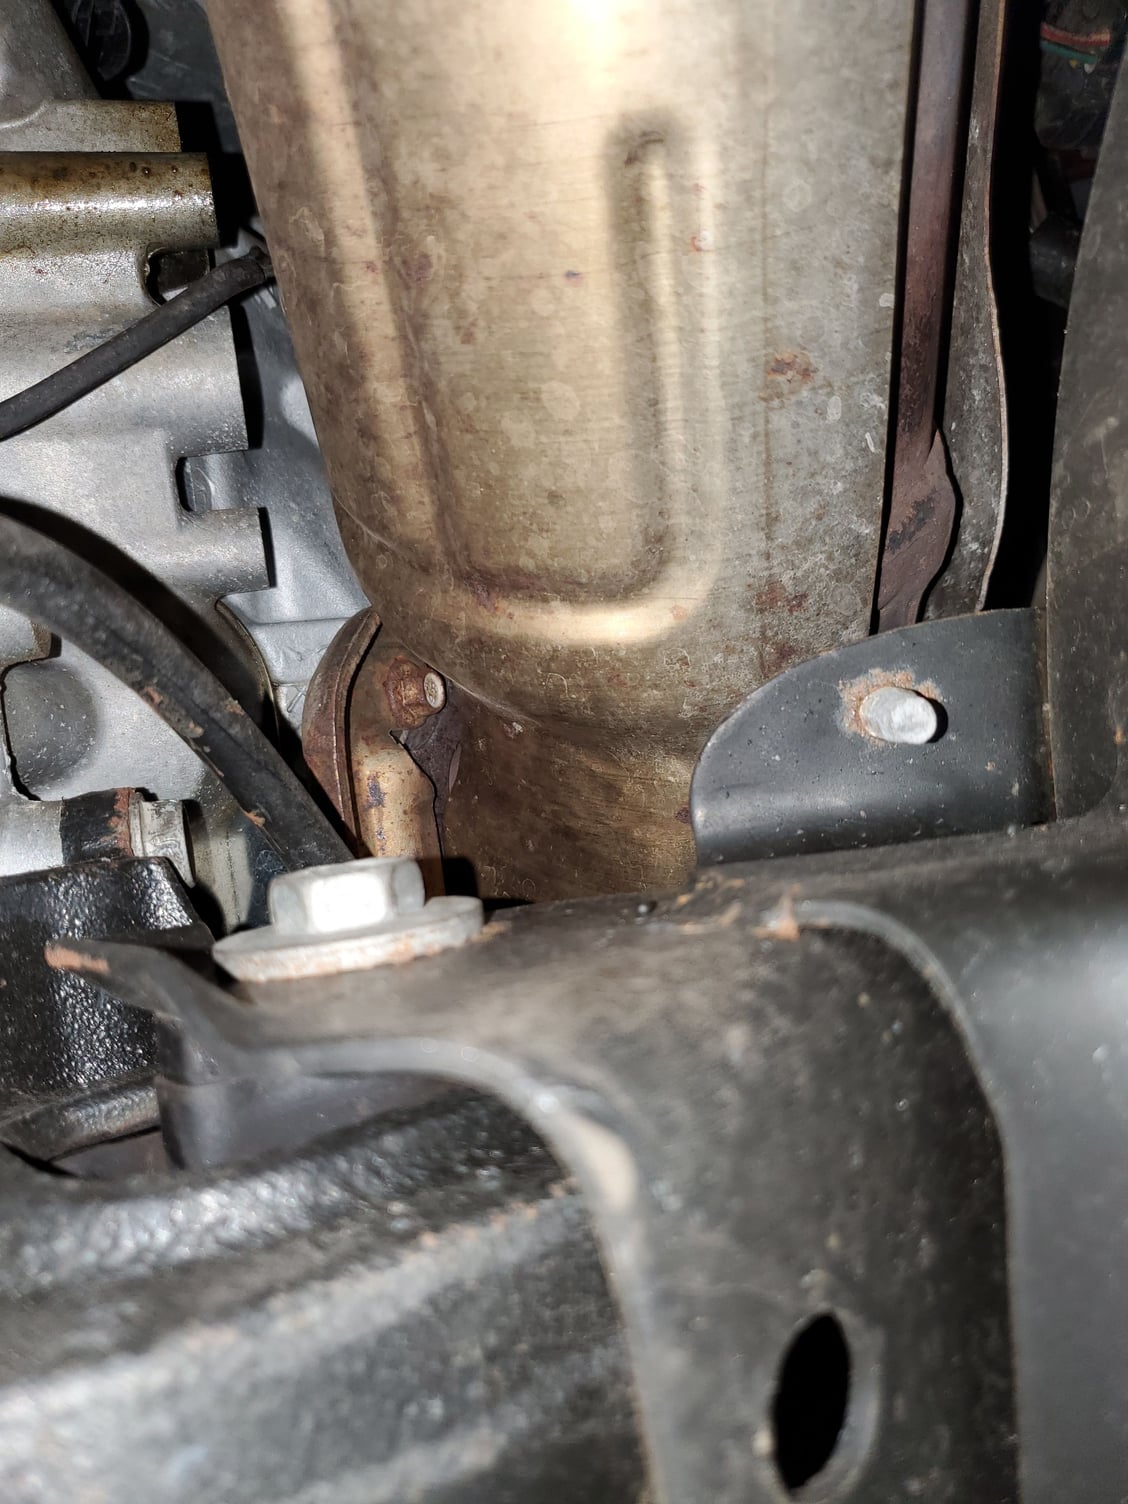 2012 JK right side catalytic converter replacement  - The top  destination for Jeep JK and JL Wrangler news, rumors, and discussion